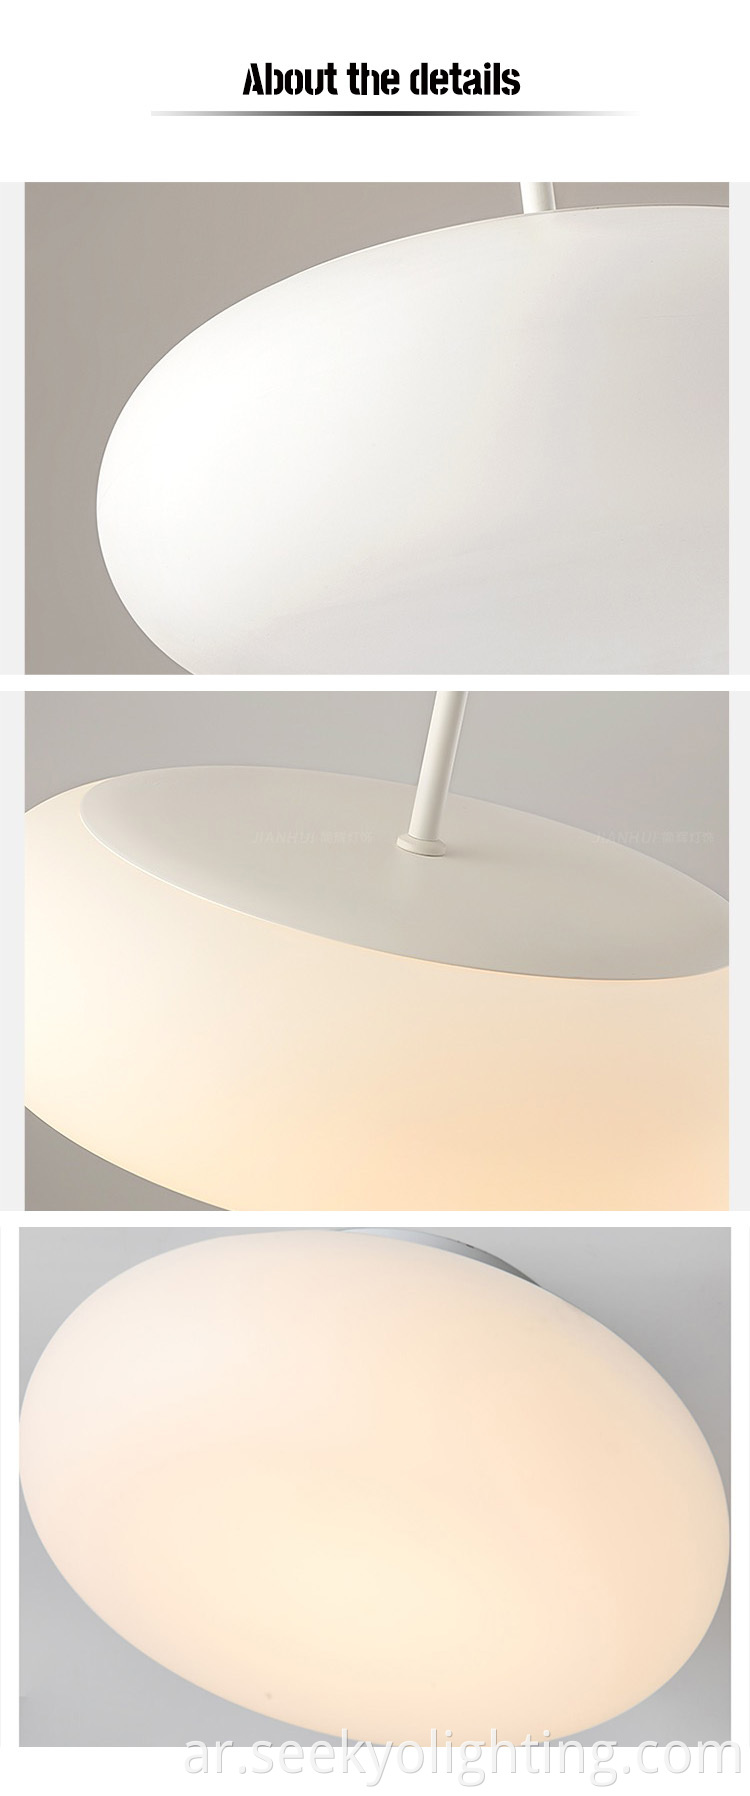 The PE Acrylic Modern Round Pebble Ceiling Lamp is easy to install and comes with all the necessary hardware.